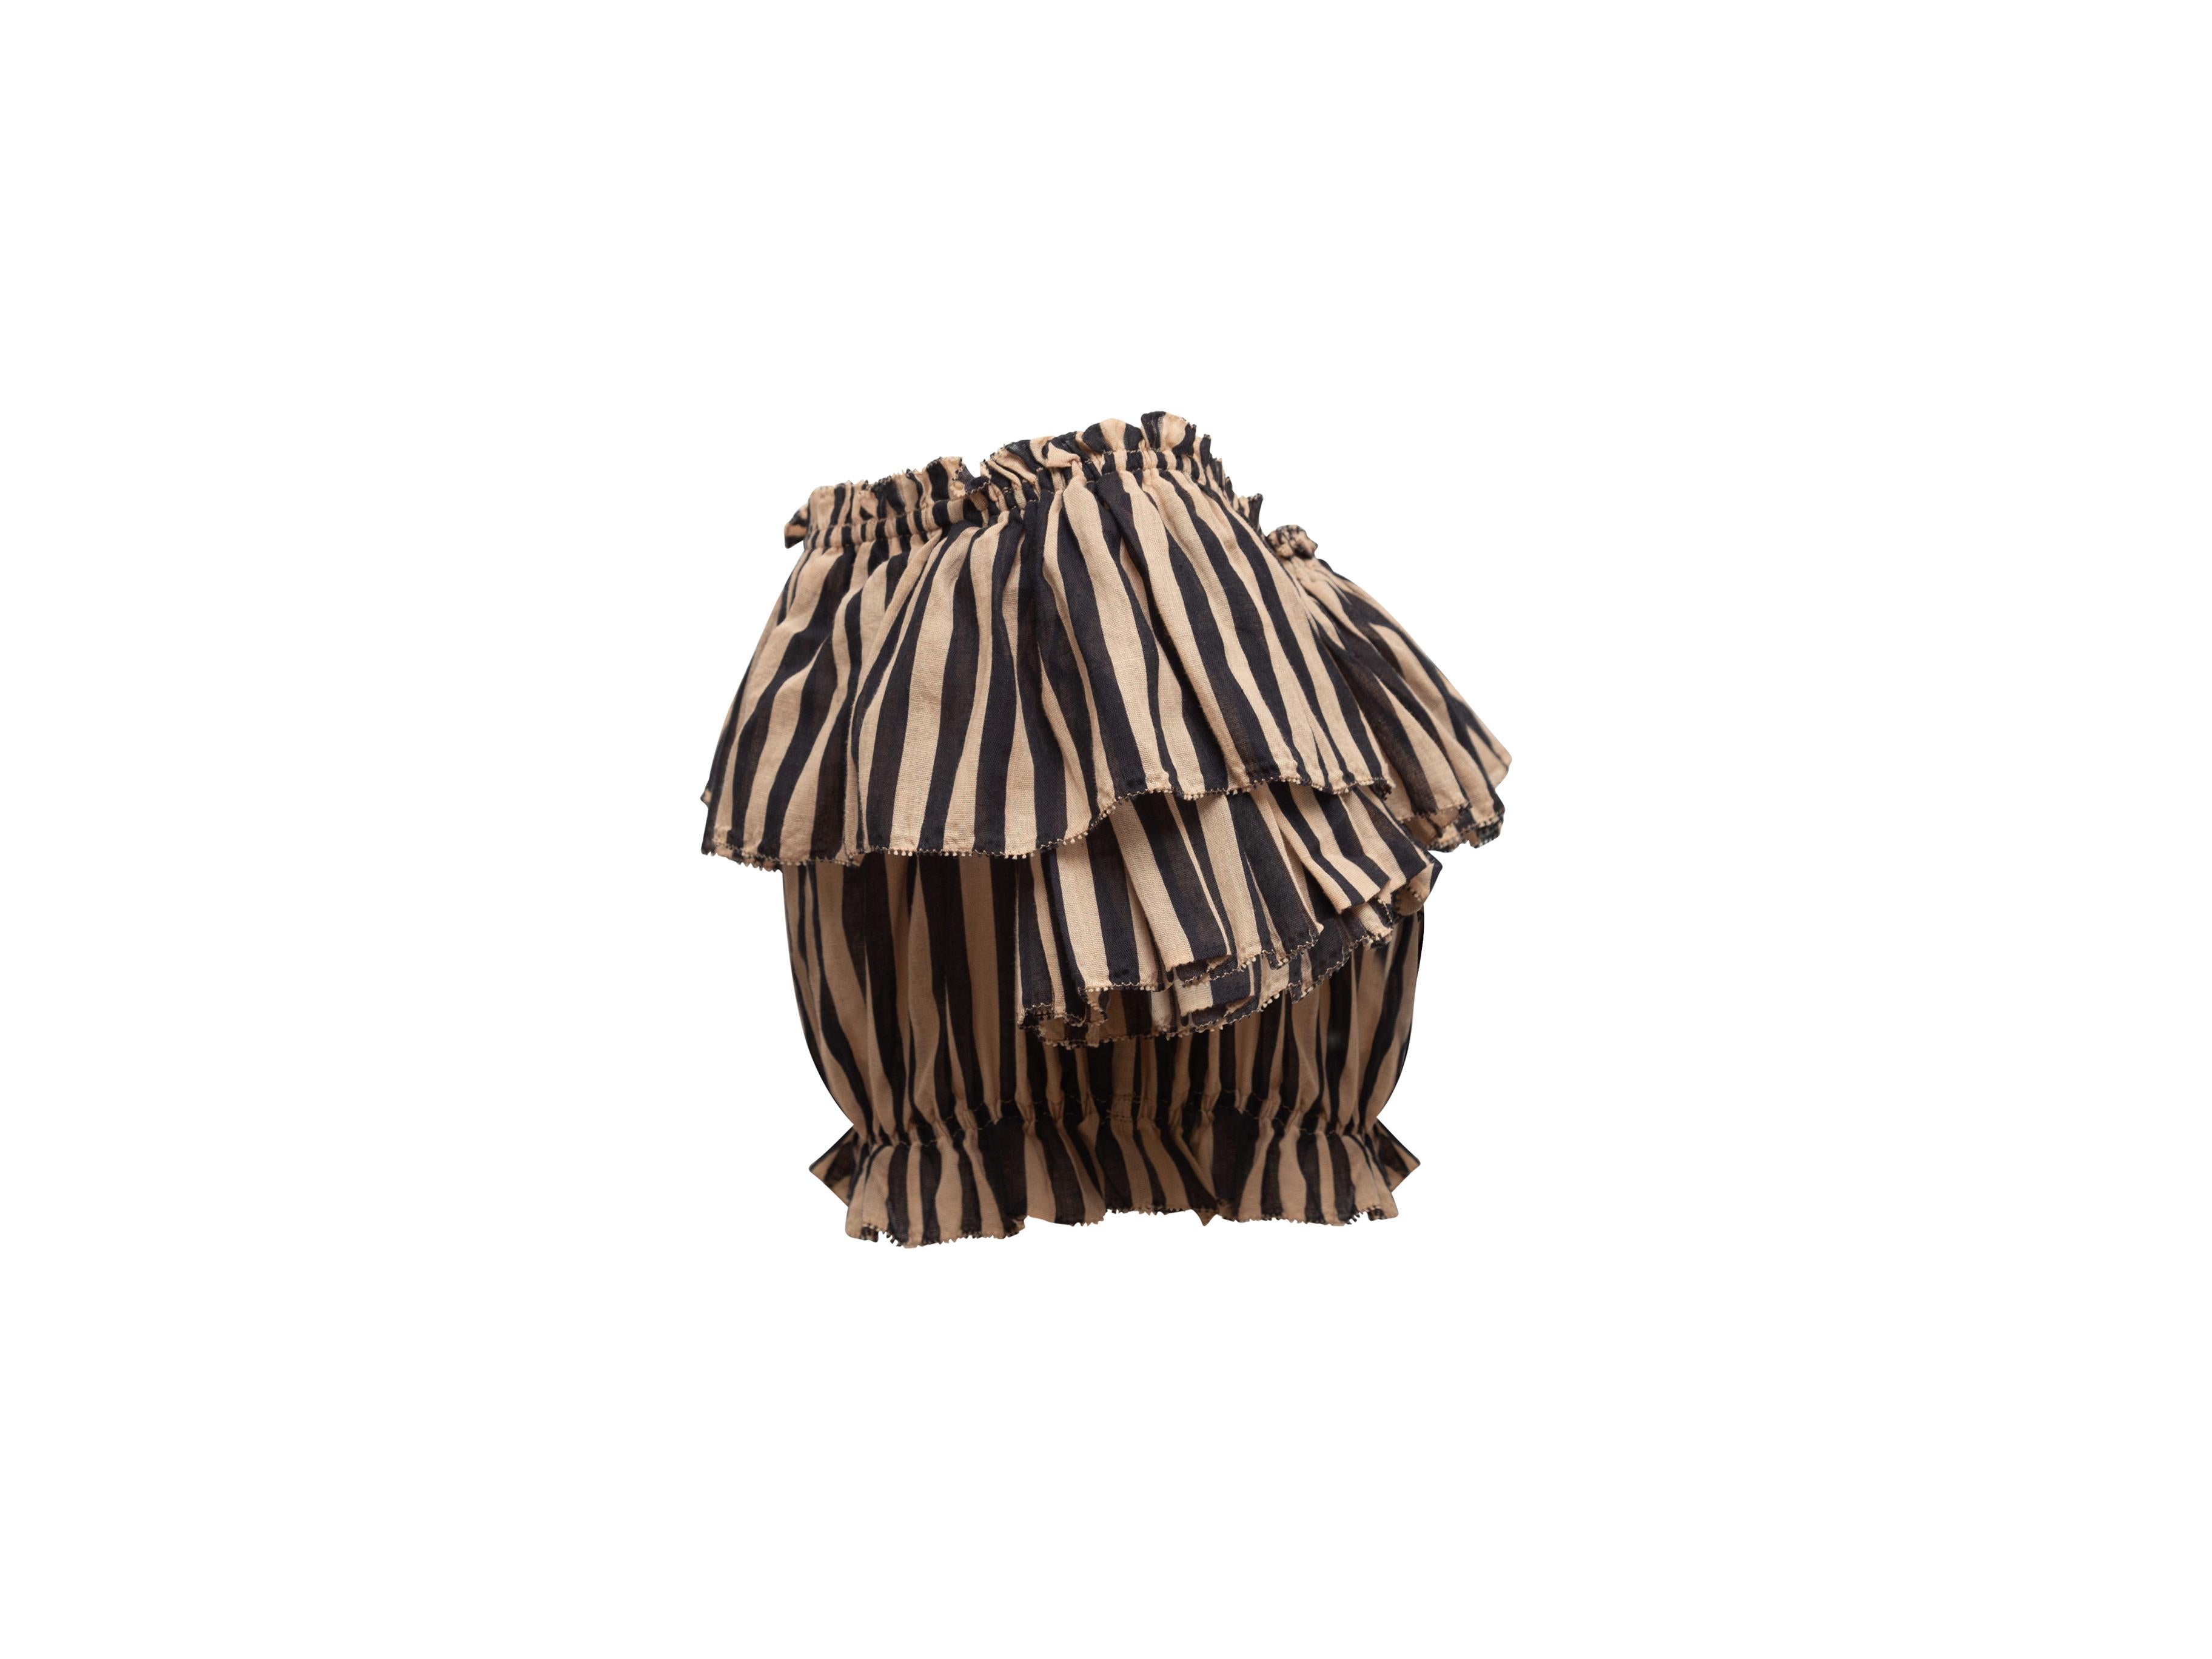 Product details: Tan and black striped strapless crop top by Zimmermann. Ruffle trim throughout. Tie accent at bust. 30